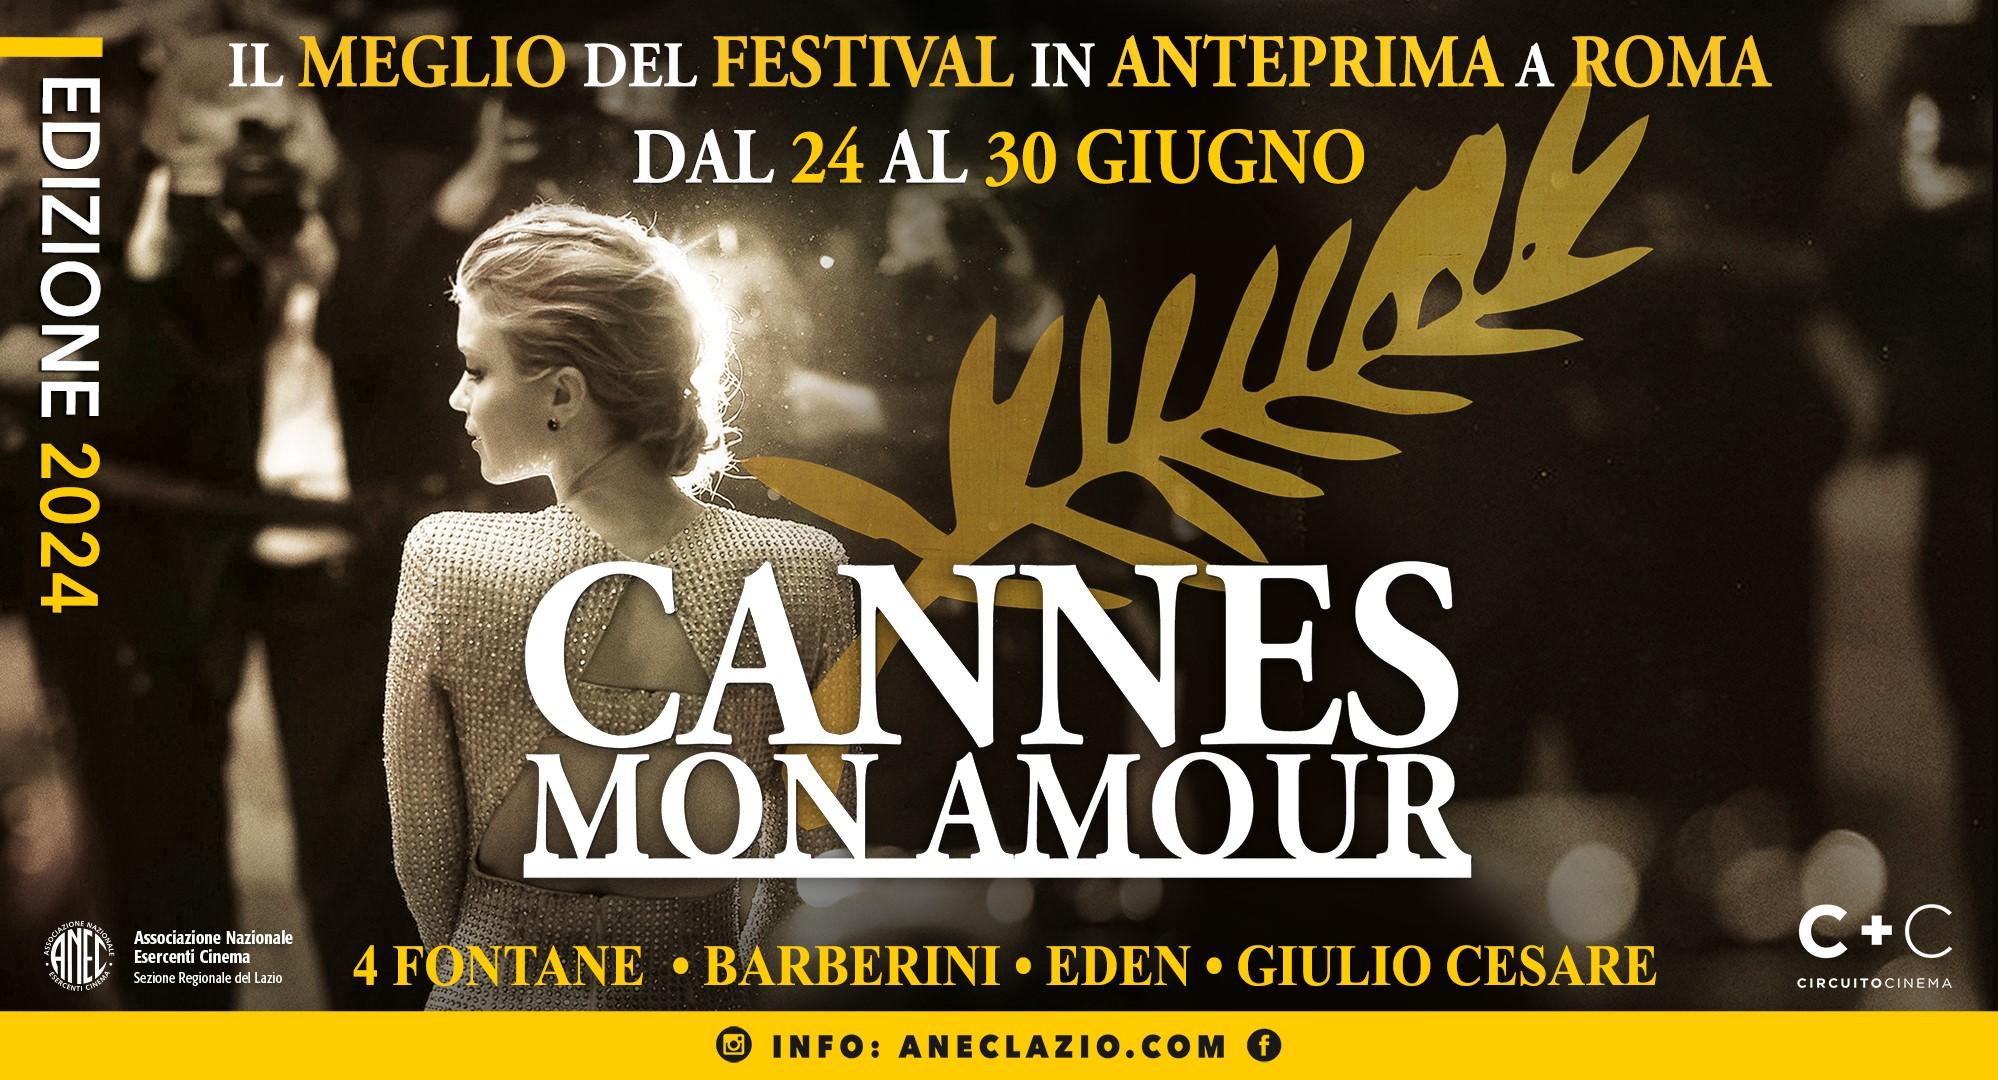 Cannes a Roma Mon Amour